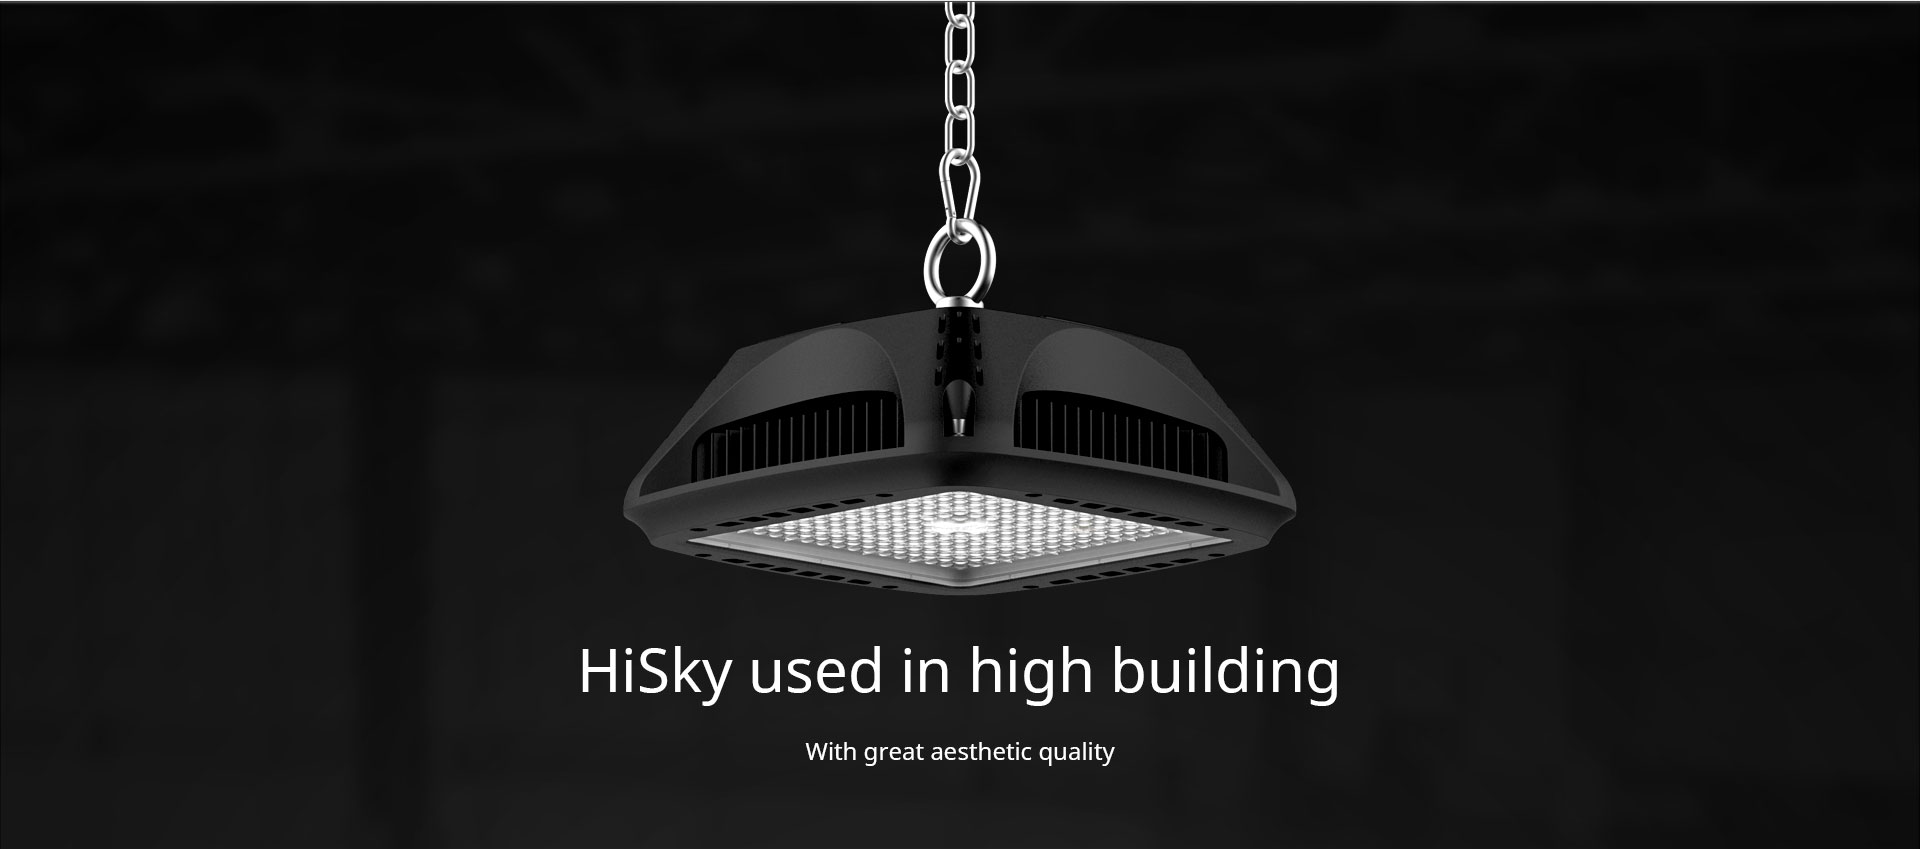 HiSky used in high building